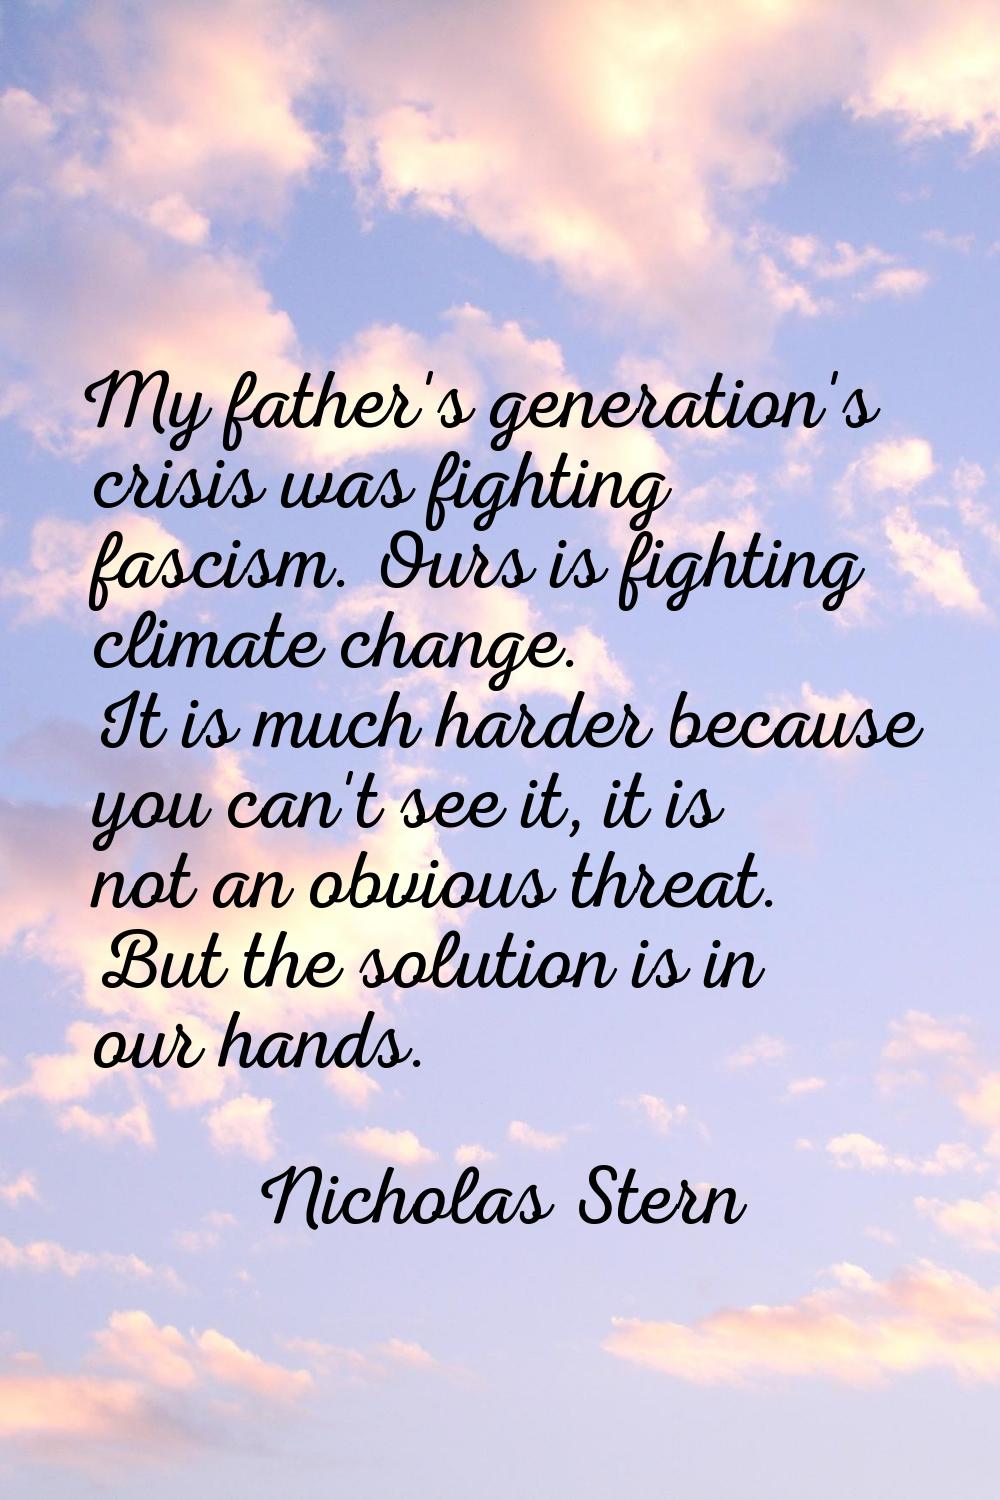 My father's generation's crisis was fighting fascism. Ours is fighting climate change. It is much h